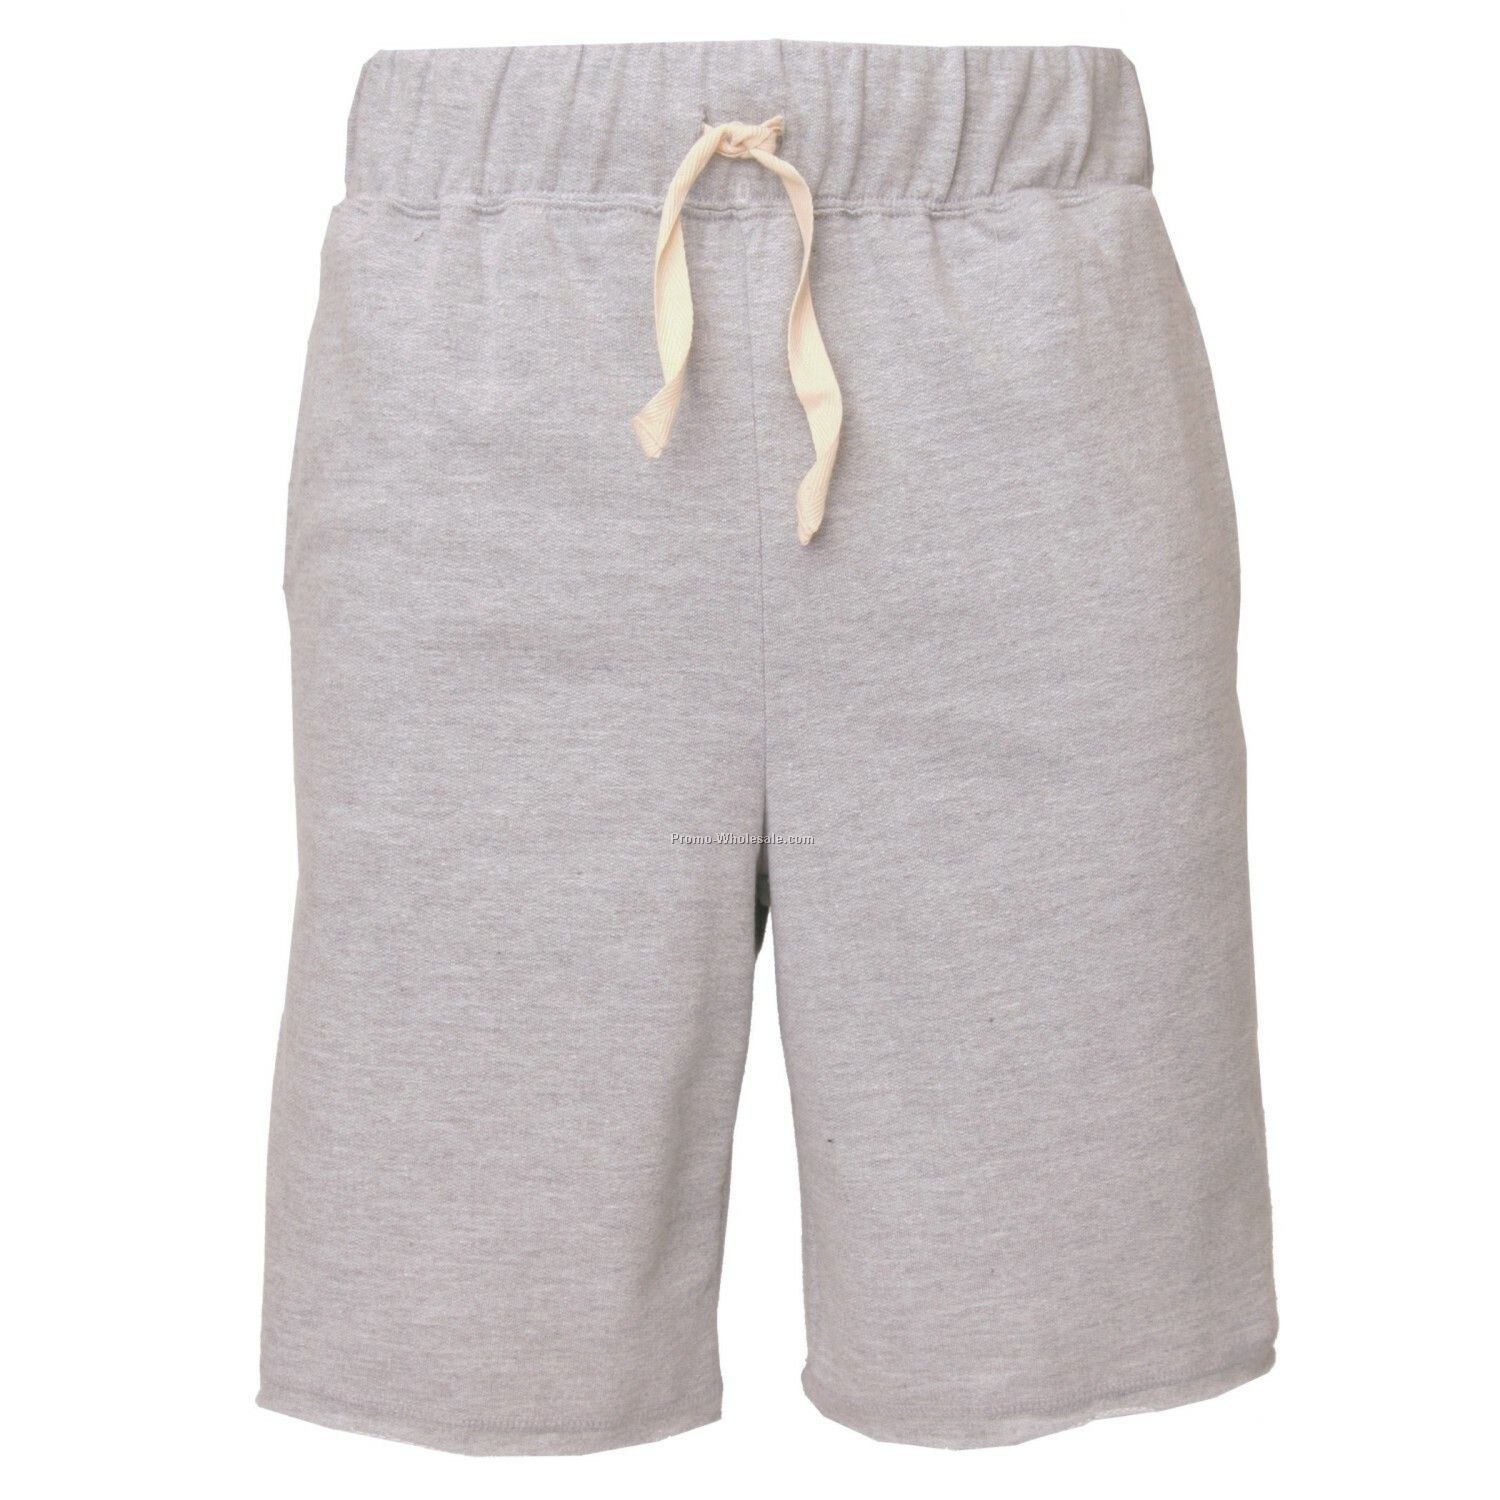 Youths' Heather Grey First Place Fleece Shorts With 2 Side Pockets (Ys-yl)